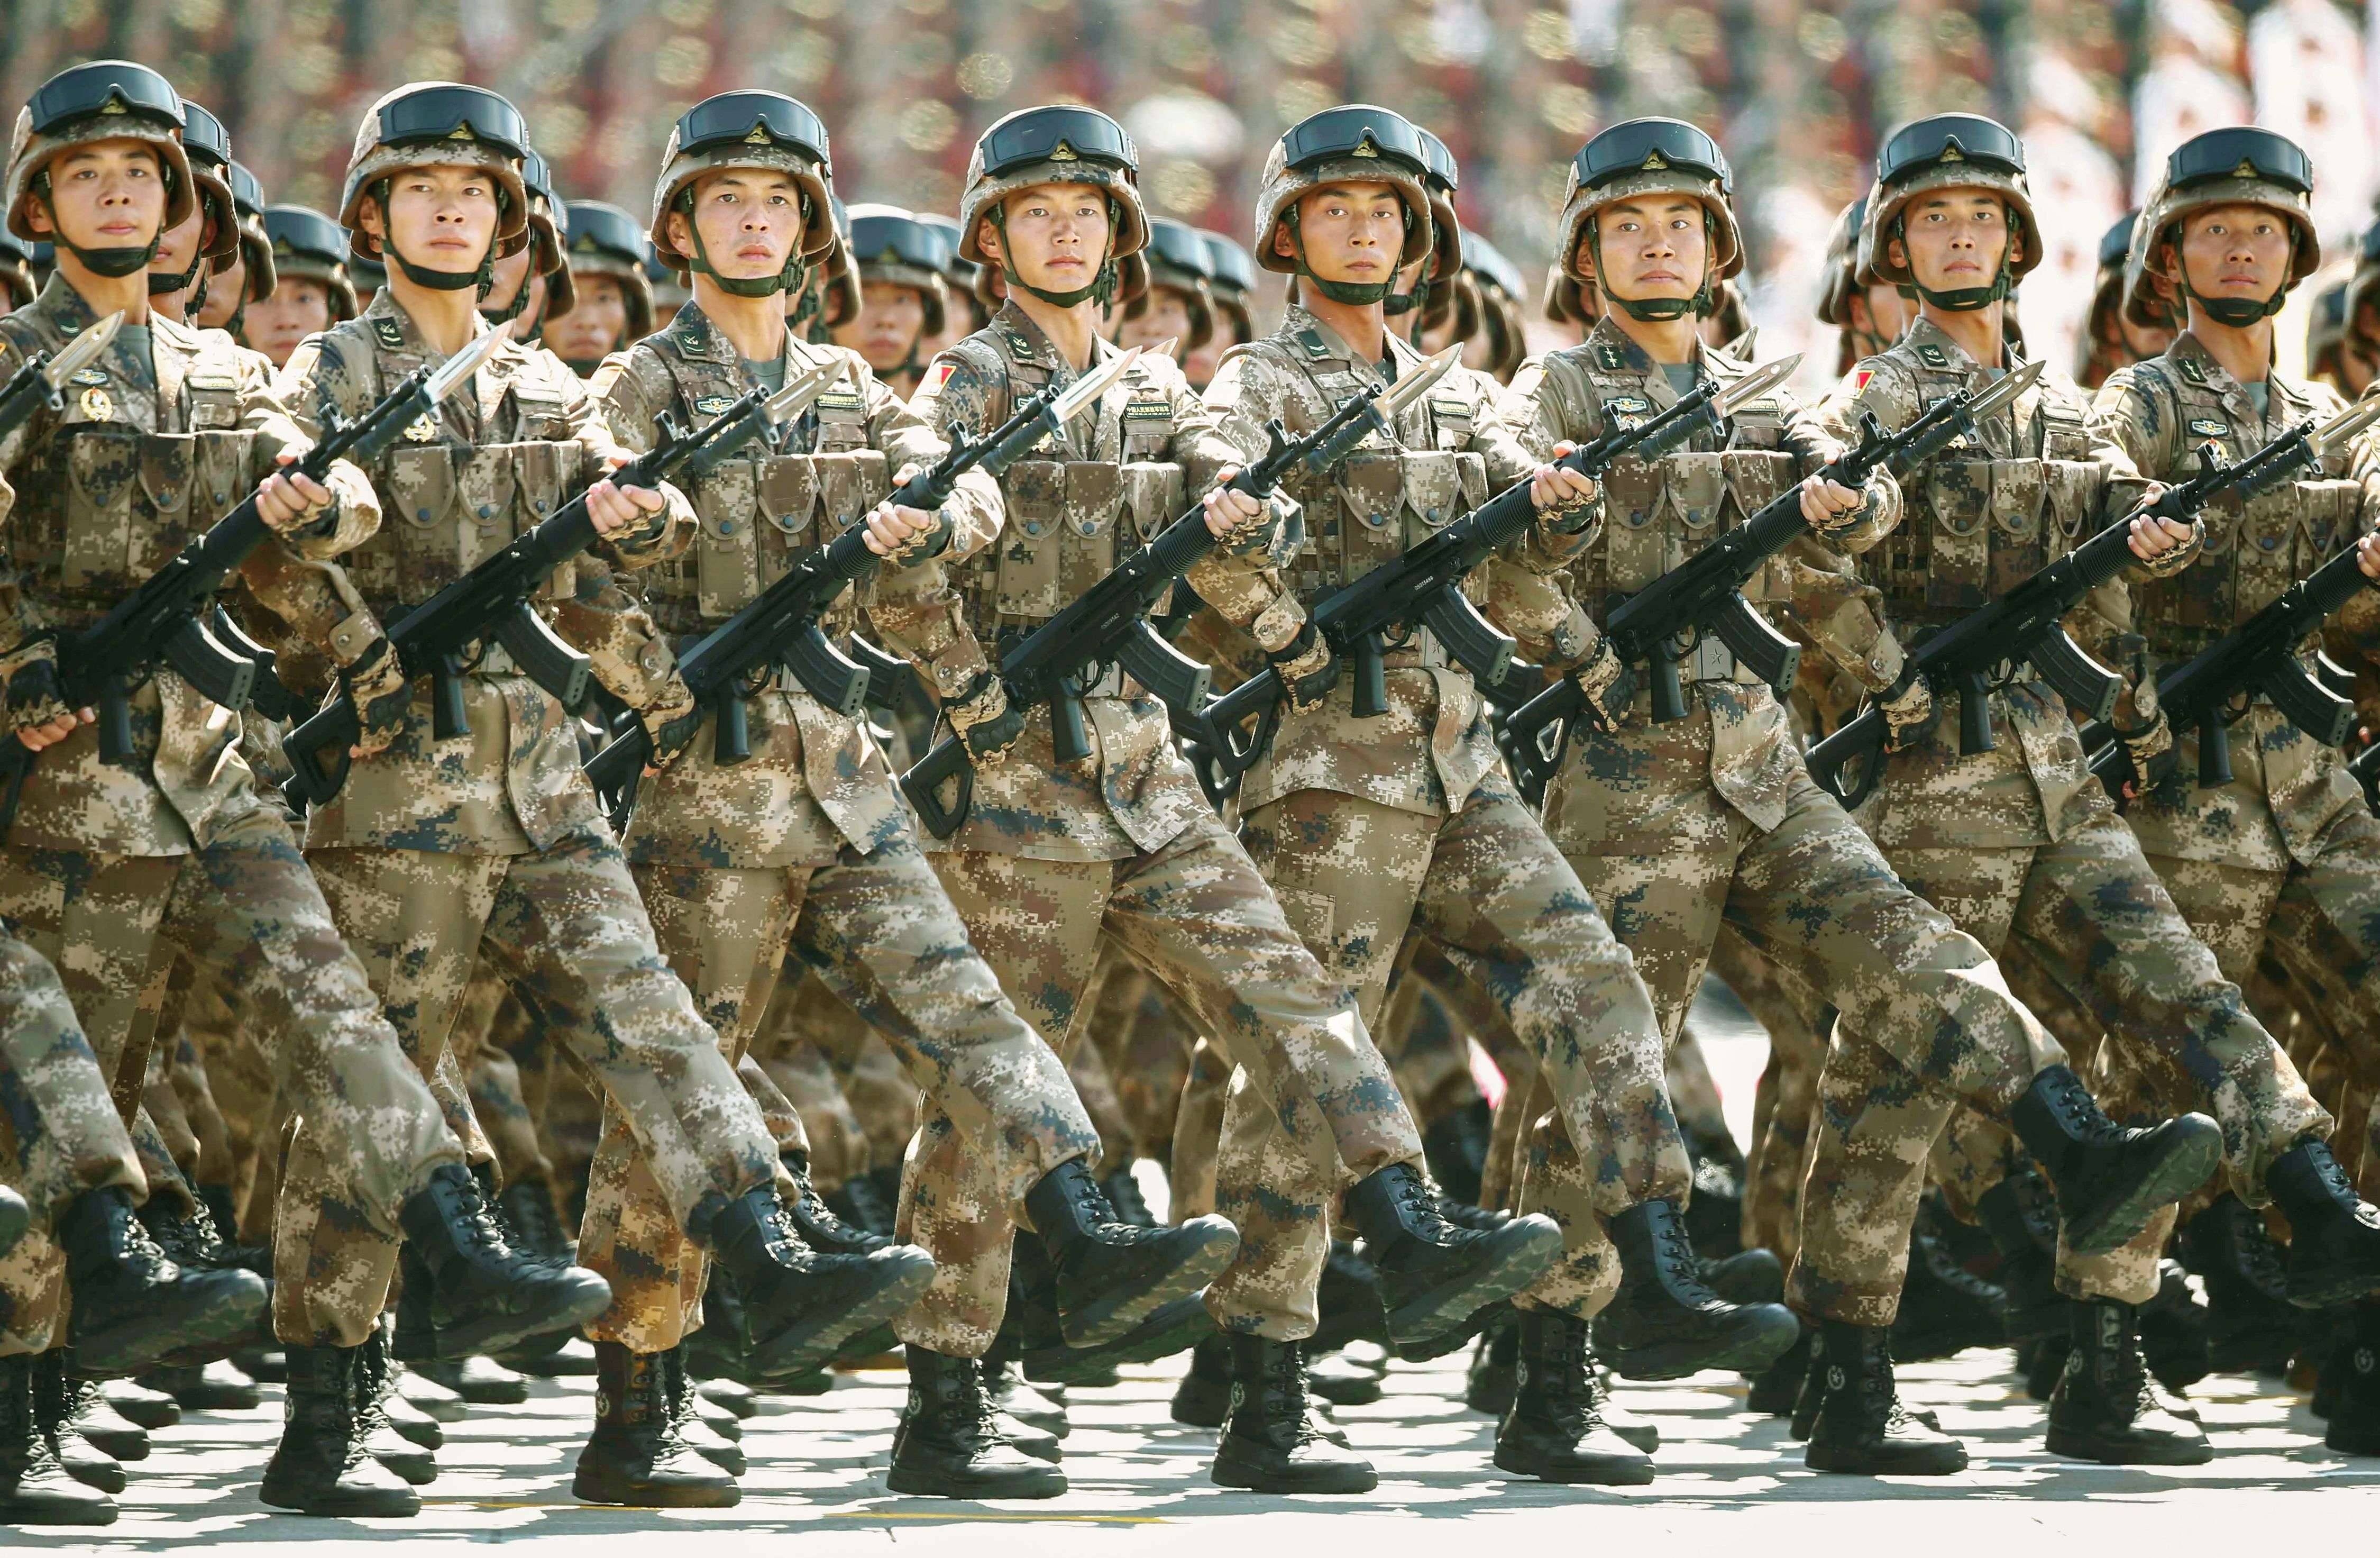 Chinese soldiers march during a parade commemorating the 70th anniversary of Japan's surrender during World War II in front of Tiananmen Gate in Beijing, Thursday, Sept. 3, 2015. The spectacle involved more than 12,000 troops, 500 pieces of military hardware and 200 aircraft of various types, representing what military officials say is the Chinese military's most cutting-edge technology. (Rolex Dela Pena/Pool Photo via AP)